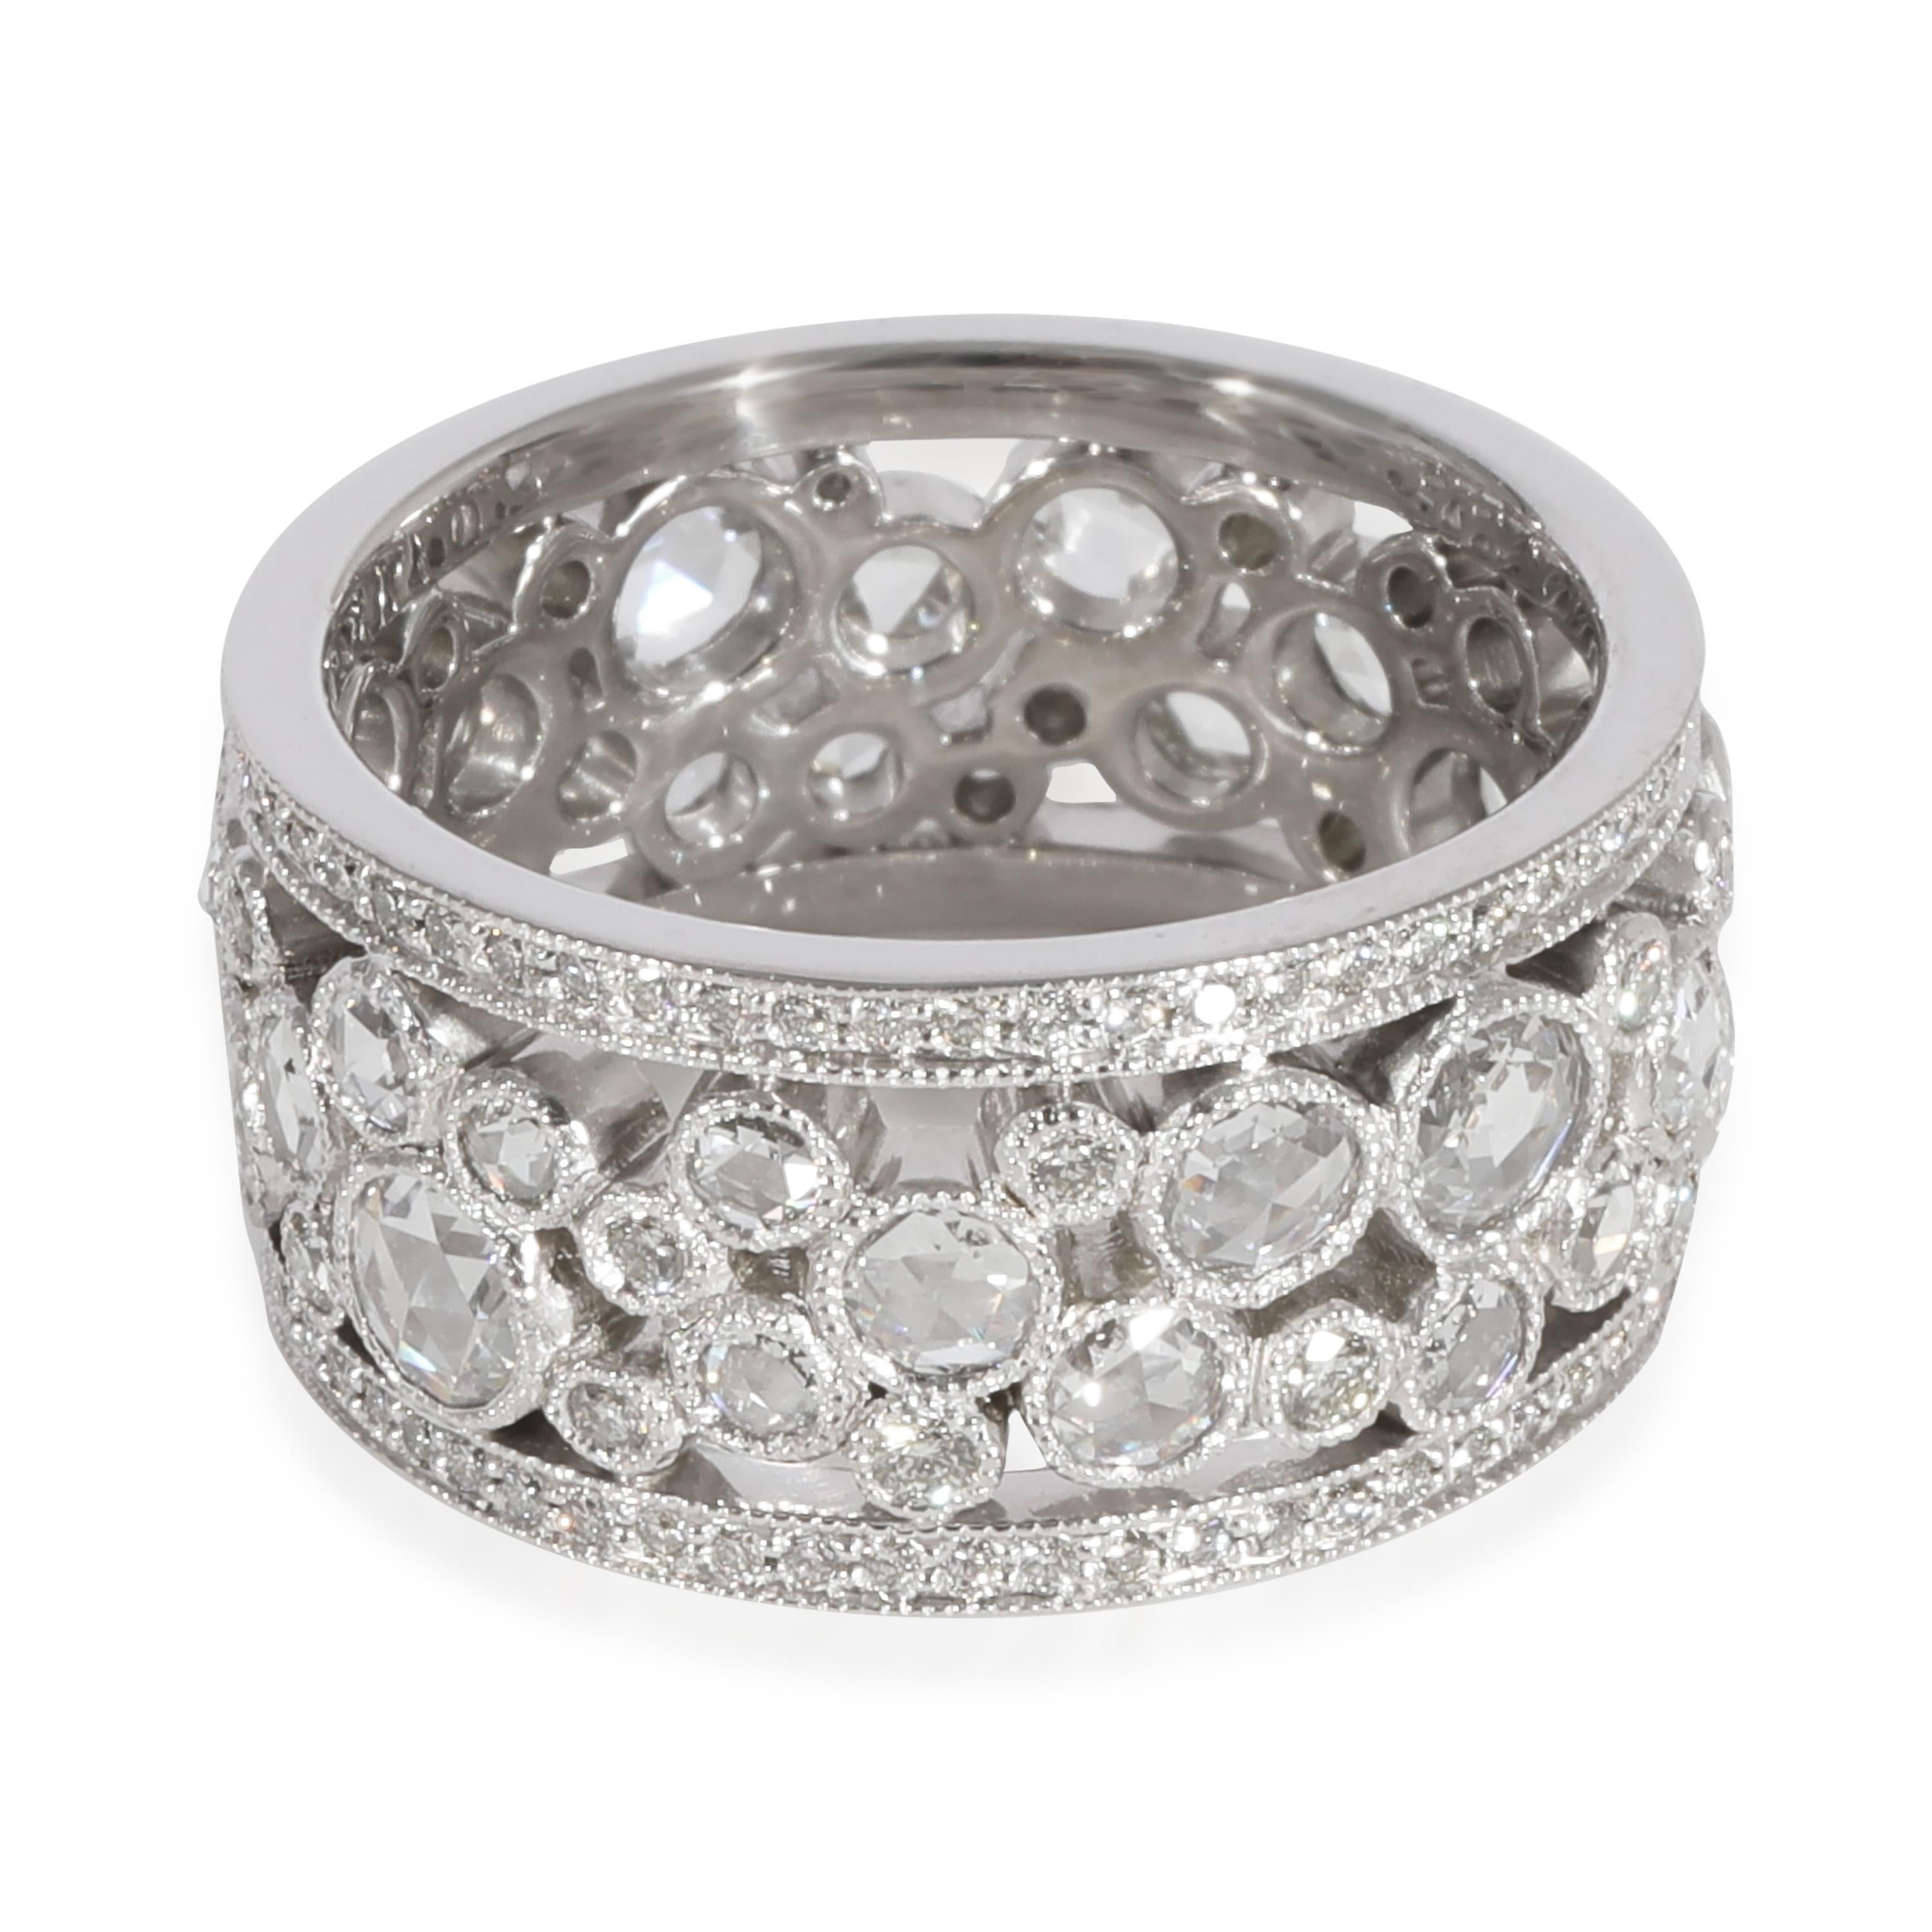 Tiffany & Co. Cobblestone Diamond Band in Platinum 2.10 CTW

PRIMARY DETAILS
SKU: 125088
Listing Title: Tiffany & Co. Cobblestone Diamond Band in Platinum 2.10 CTW
Condition Description: Retails for 14500 USD. In excellent condition and recently